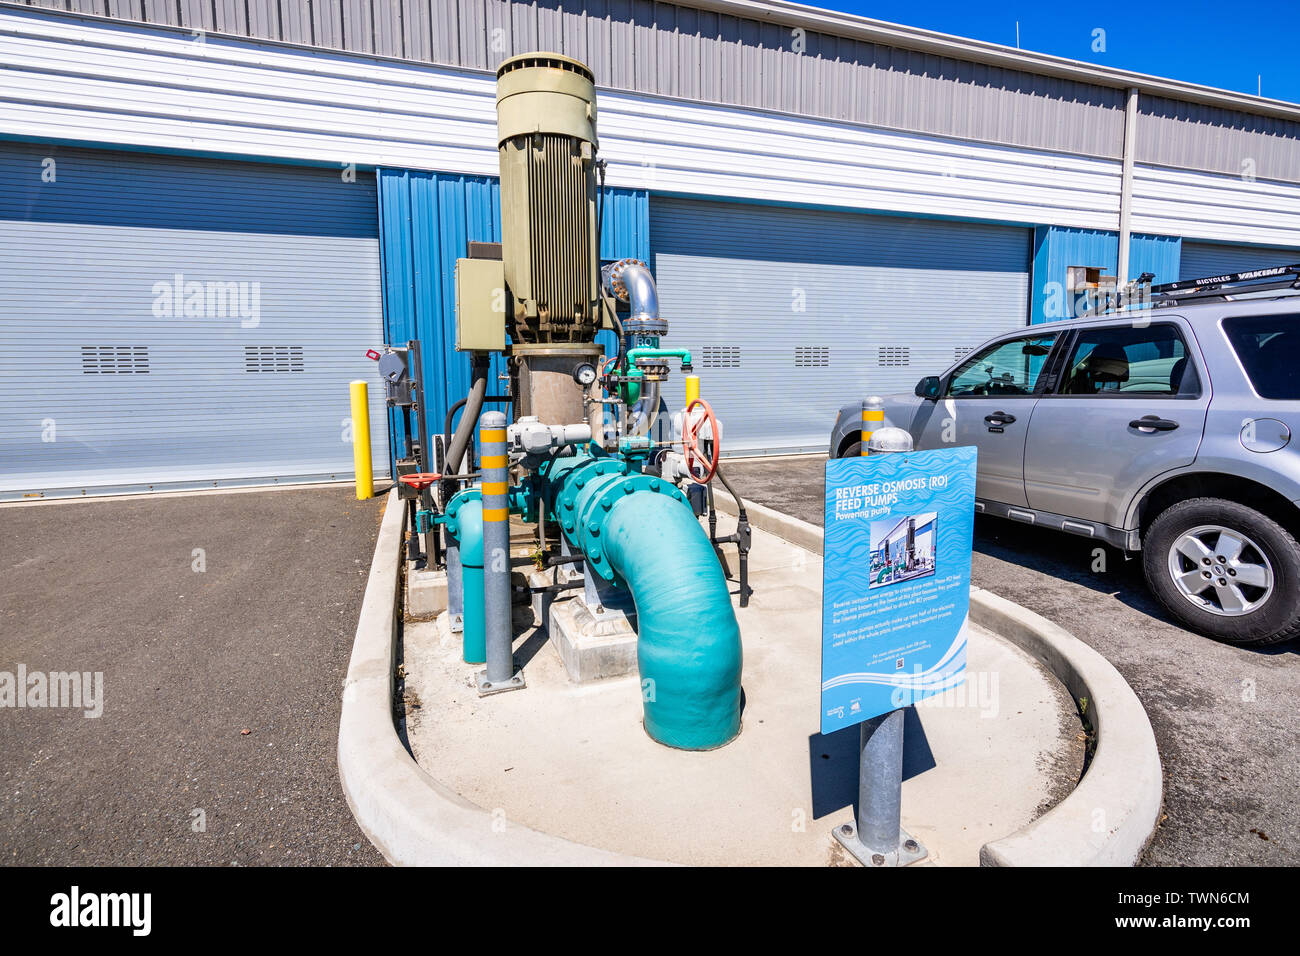 June 20, 2019 San Jose / CA / USA - Reverse osmosis feed pump at the Silicon Valley Advanced Water Purification Center located in San Francisco bay ar Stock Photo